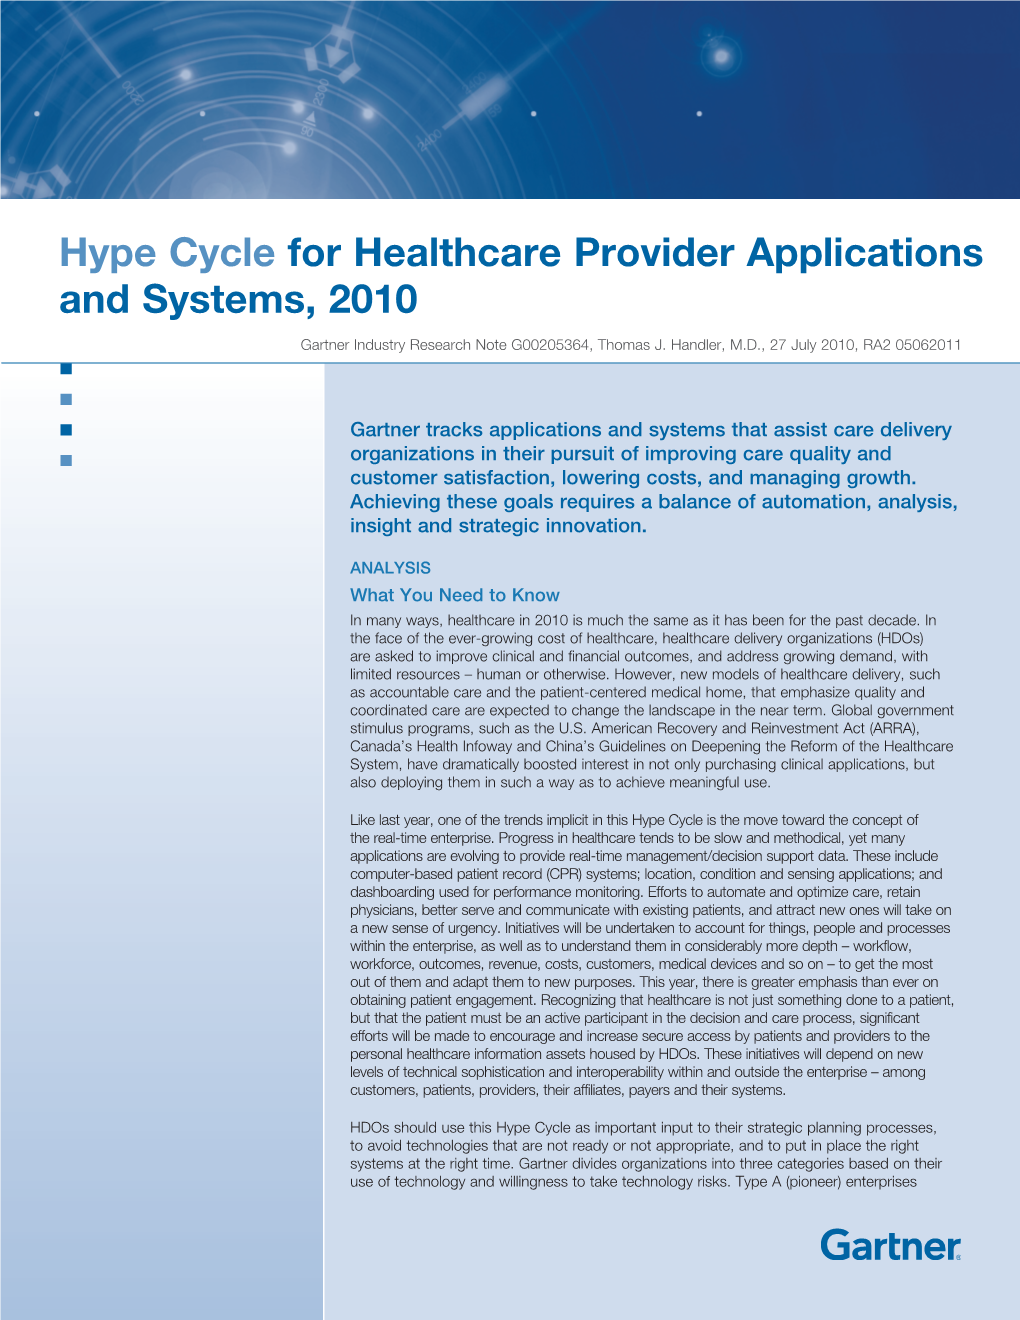 Hype Cycle for Healthcare Provider Applications and Systems, 2010